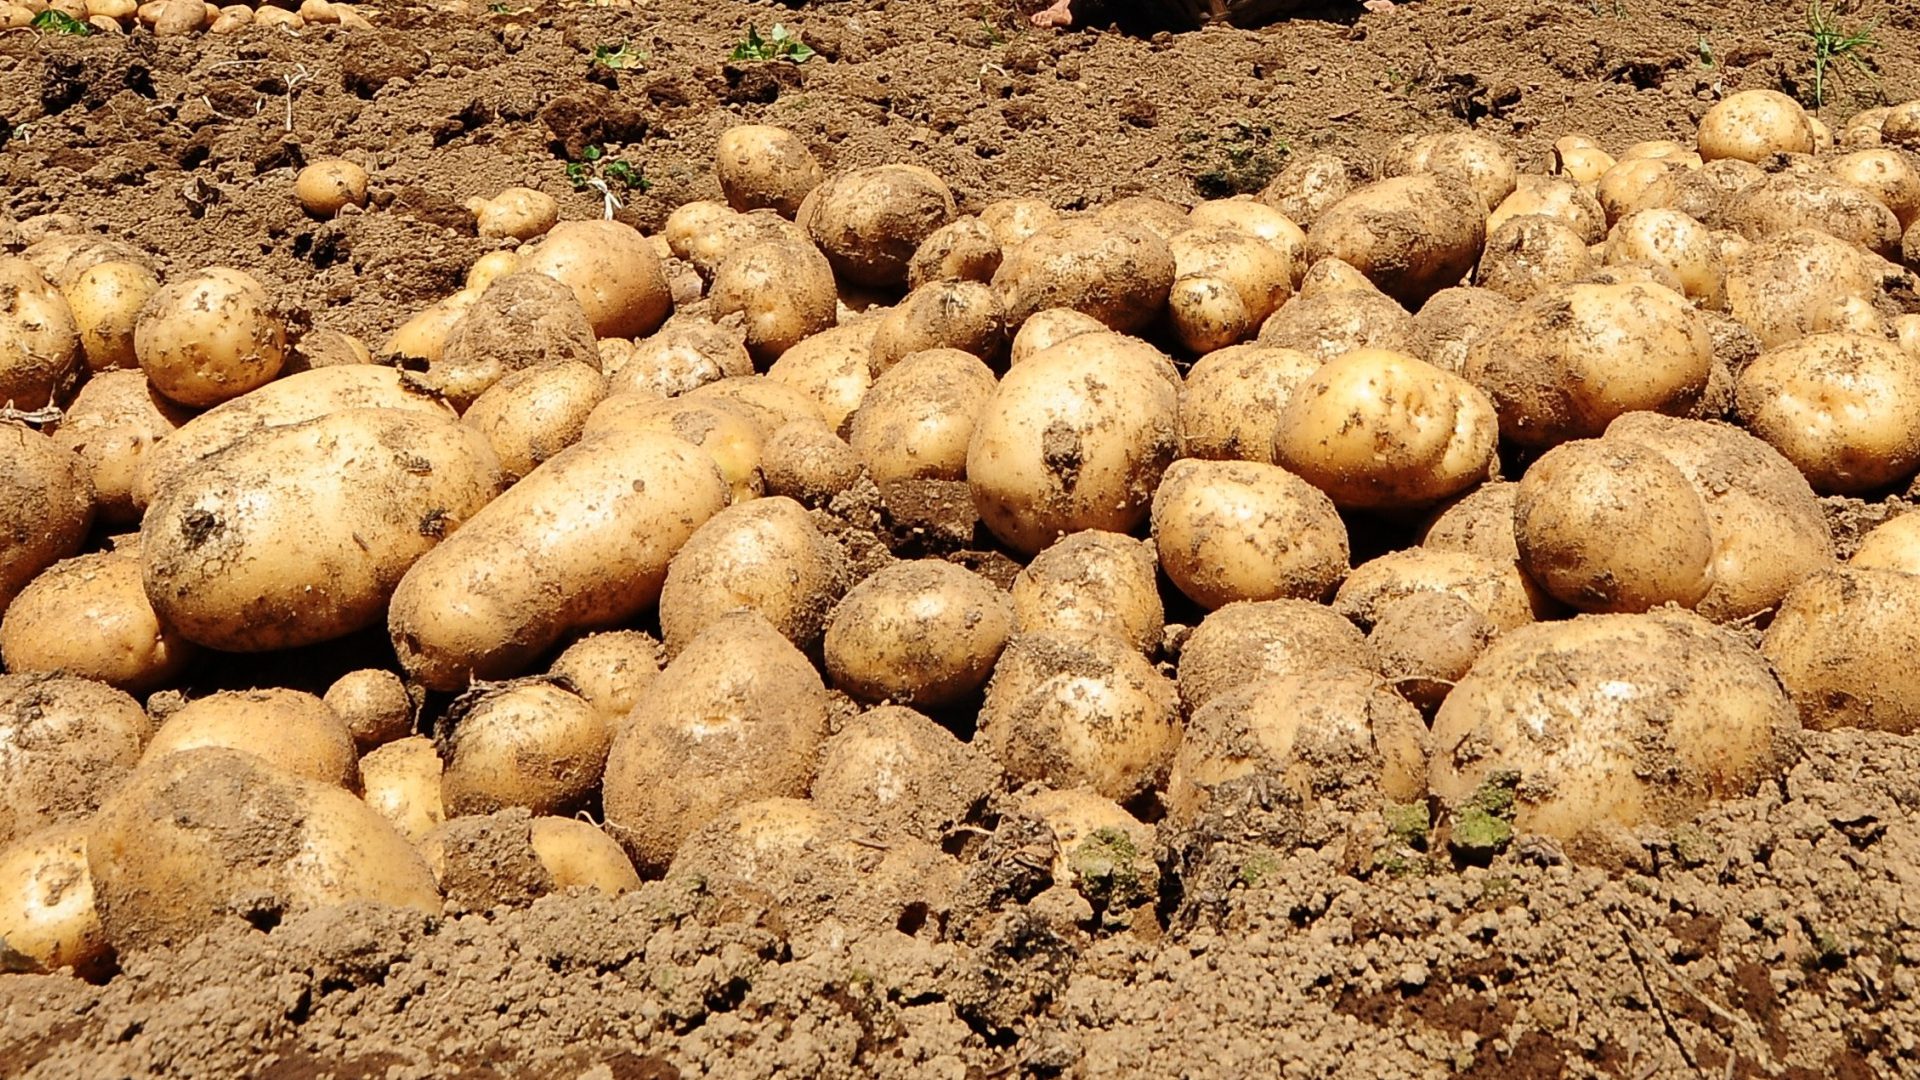 Are All Potatoes Genetically Modified?